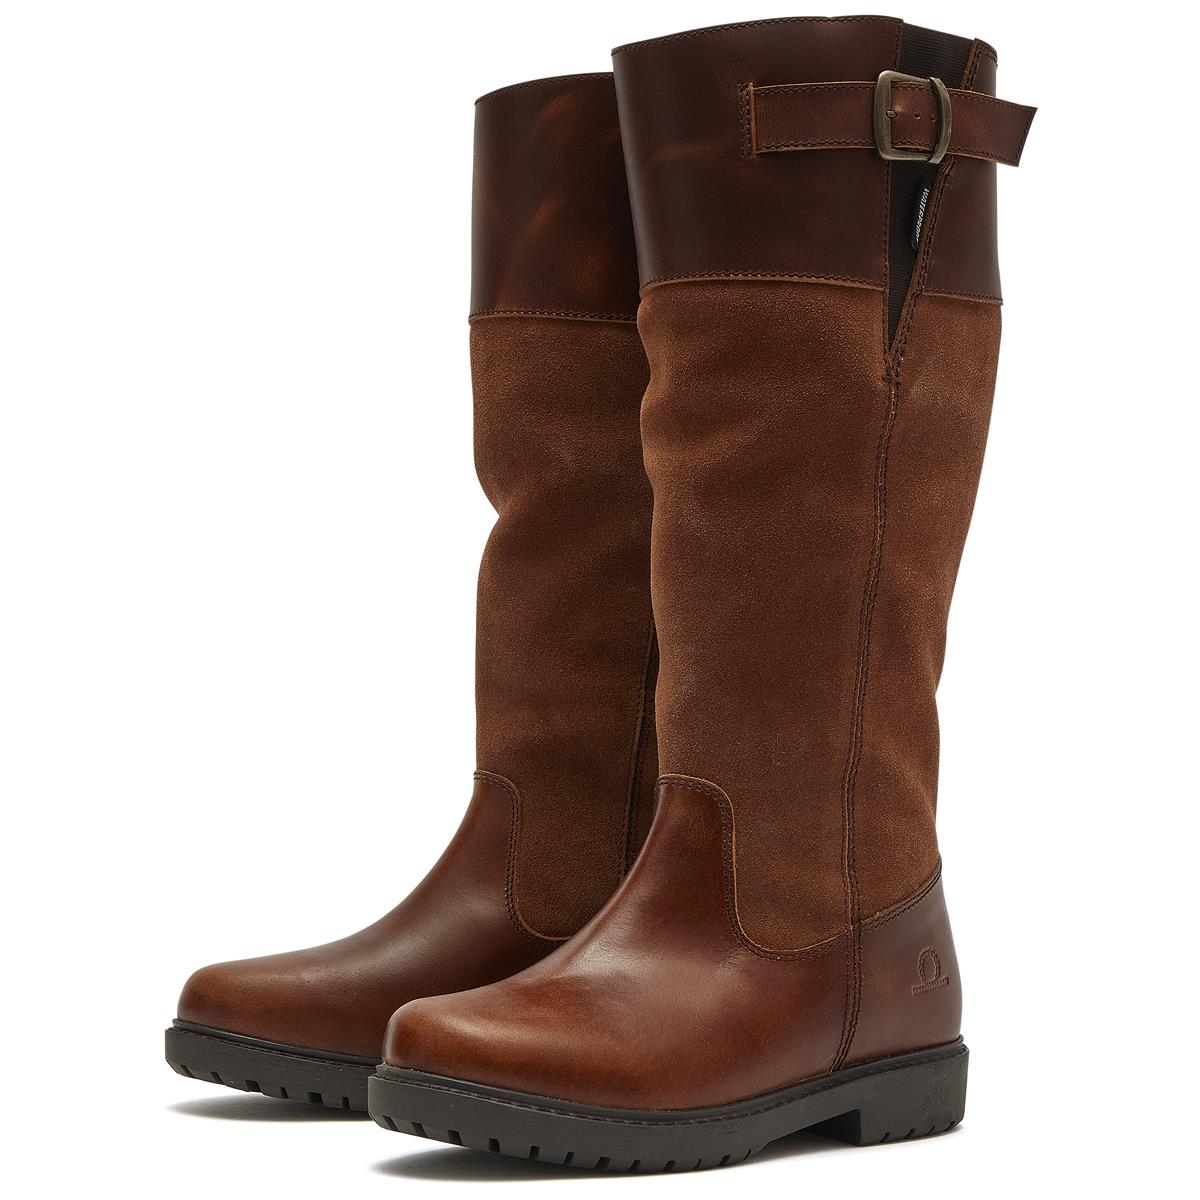 Chatham Womens Brooksby Riding Boots Questions & Answers